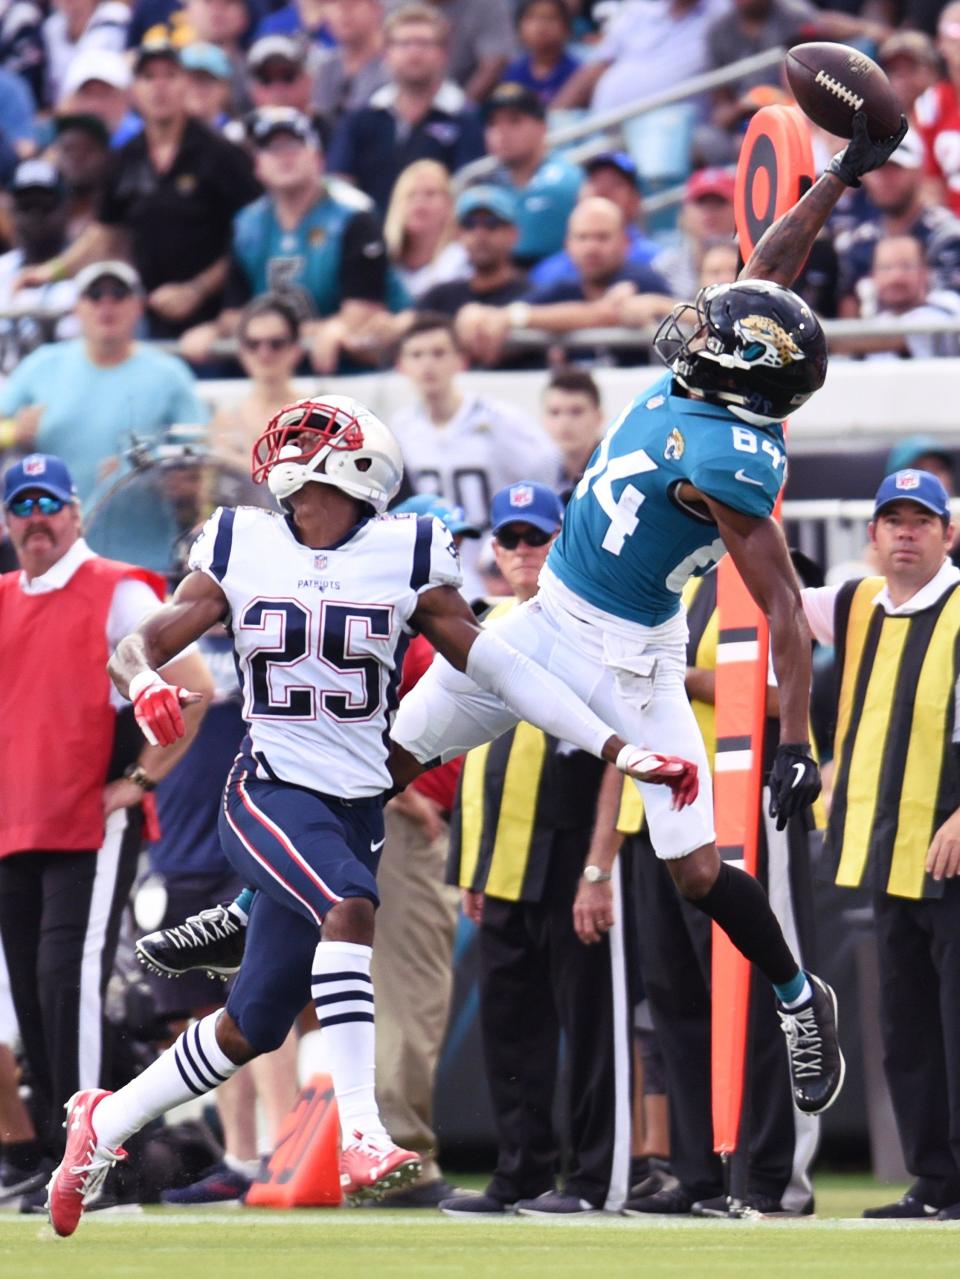 16. Patriot revenge. It was the highlight reel of a dismal 2018 season. The Jaguars got a small measure of redemption from the AFC Championship heartbreak eight months earlier with a 31-20 home victory over the New England Patriots.<br />The Week 2 conquest before a boisterous TIAA Bank Field crowd of 68,527 marked the first time the Jaguars had beaten Brady after eight previous defeats (playoffs included). The maligned Bortles had a career day, completing 29 of 45 passes for 376 yards and 3 TDs, securing the victory on receiver Dede Westbrook's 61-yard catch-and-run to the end zone.<br />But the euphoria didn't last as the Jaguars lost eight of their next nine games, while New England went on to win a sixth Super Bowl. [Bob Self/Florida Times-Union]